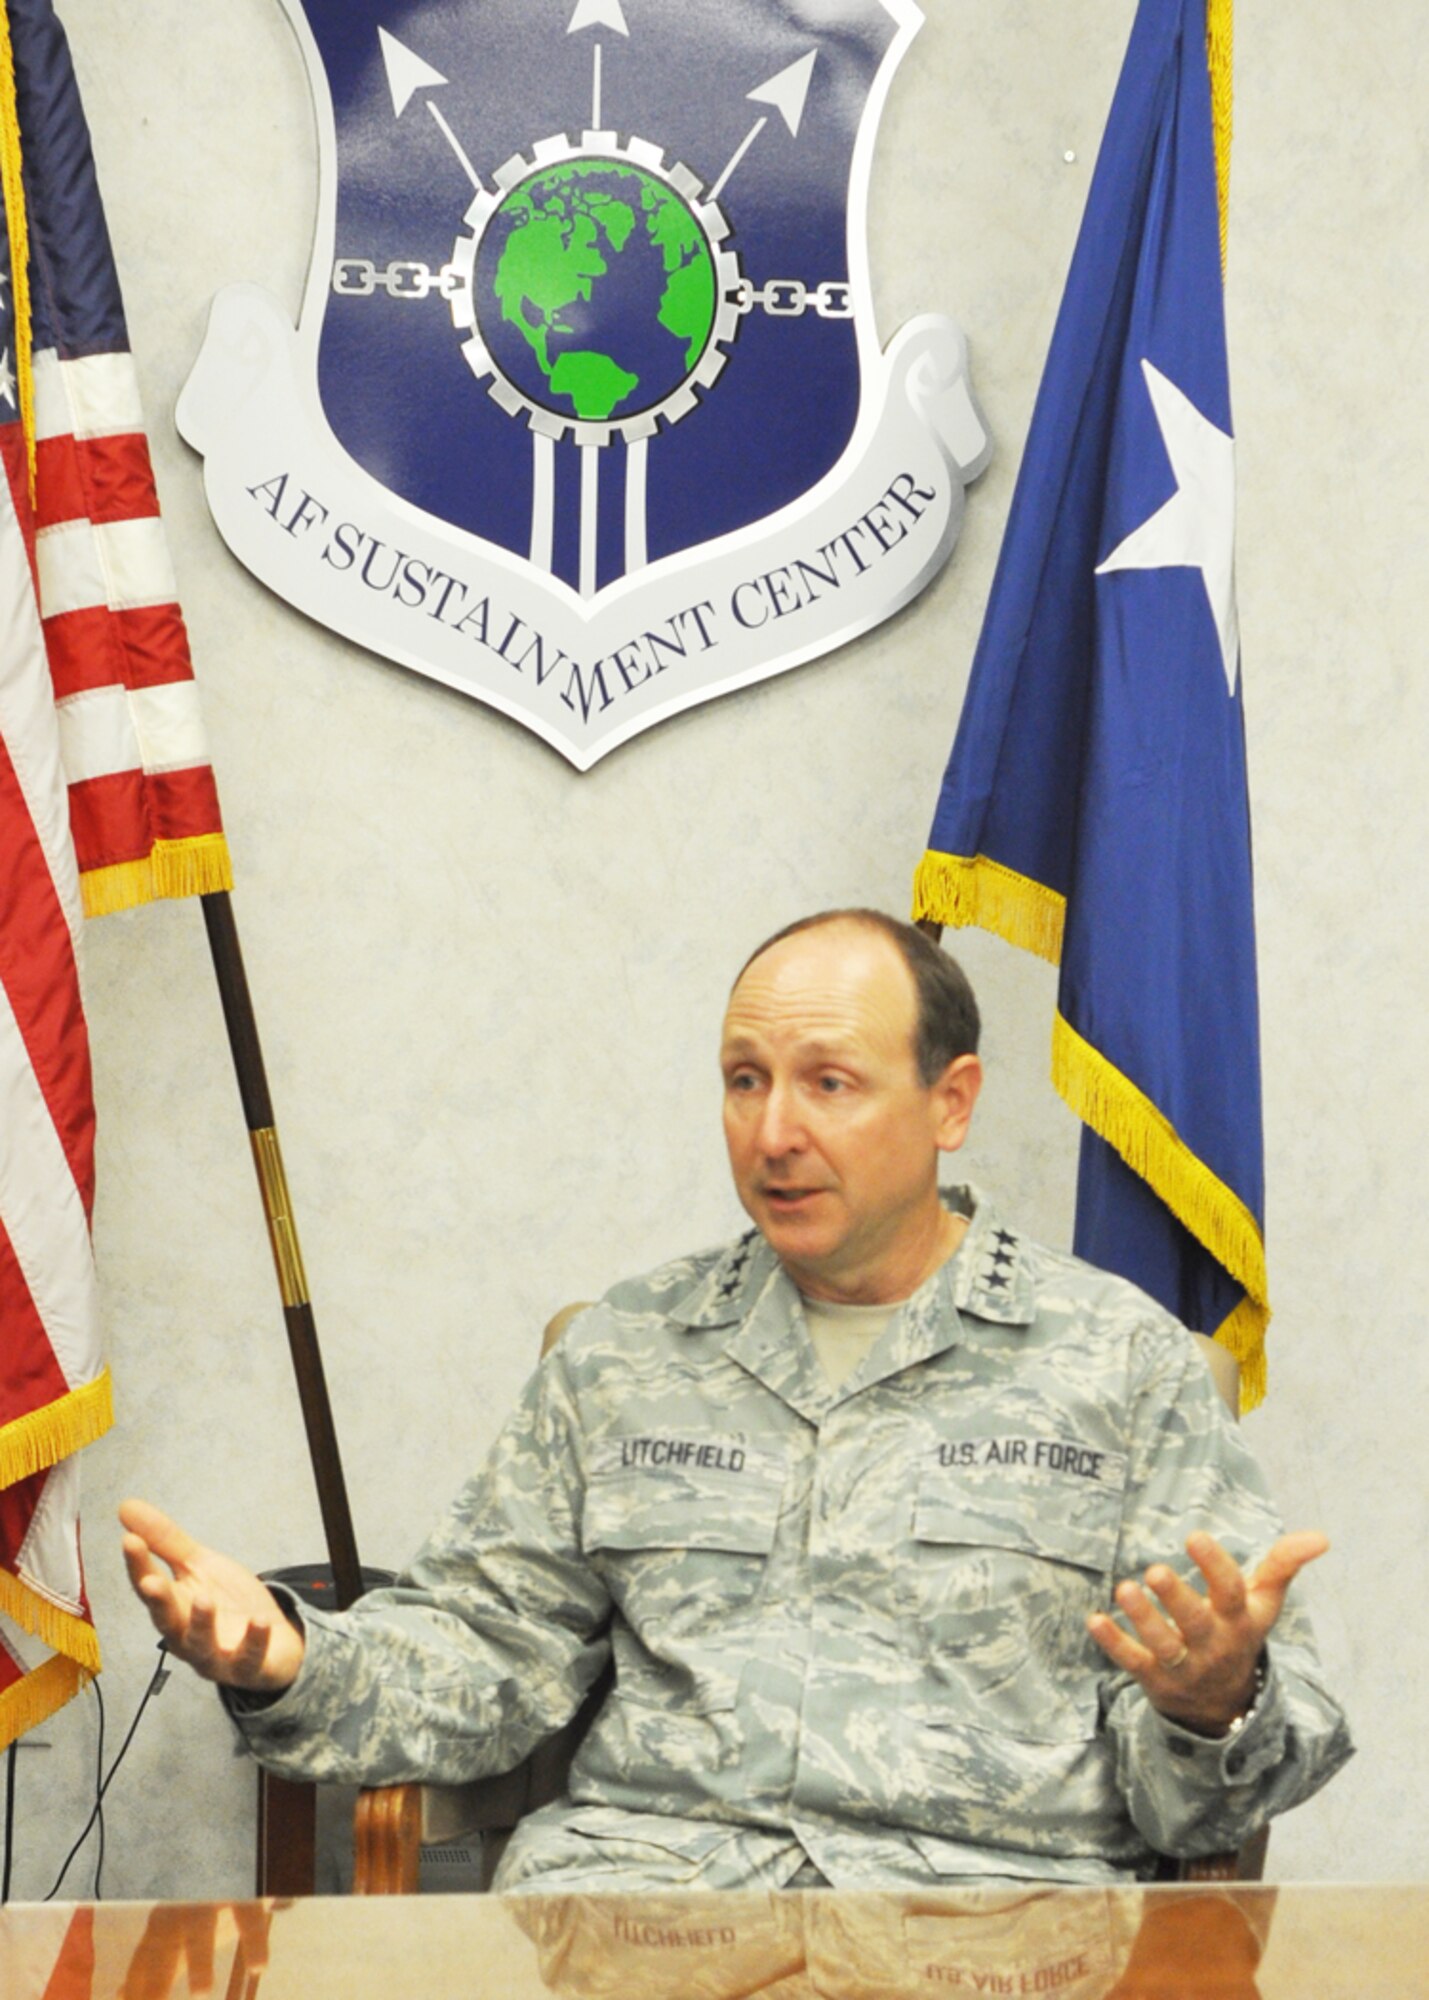 Lt. Gen. Bruce Litchfield, Air Force Sustainment Center commander, 
stresses the need for greater awareness of the problem sexual assault 
poses for all Airmen and the mission during an interview at Tinker Air Force Base, Okla., June 17, 2013. (U.S. Air Force photo by Micah Garbarino)
